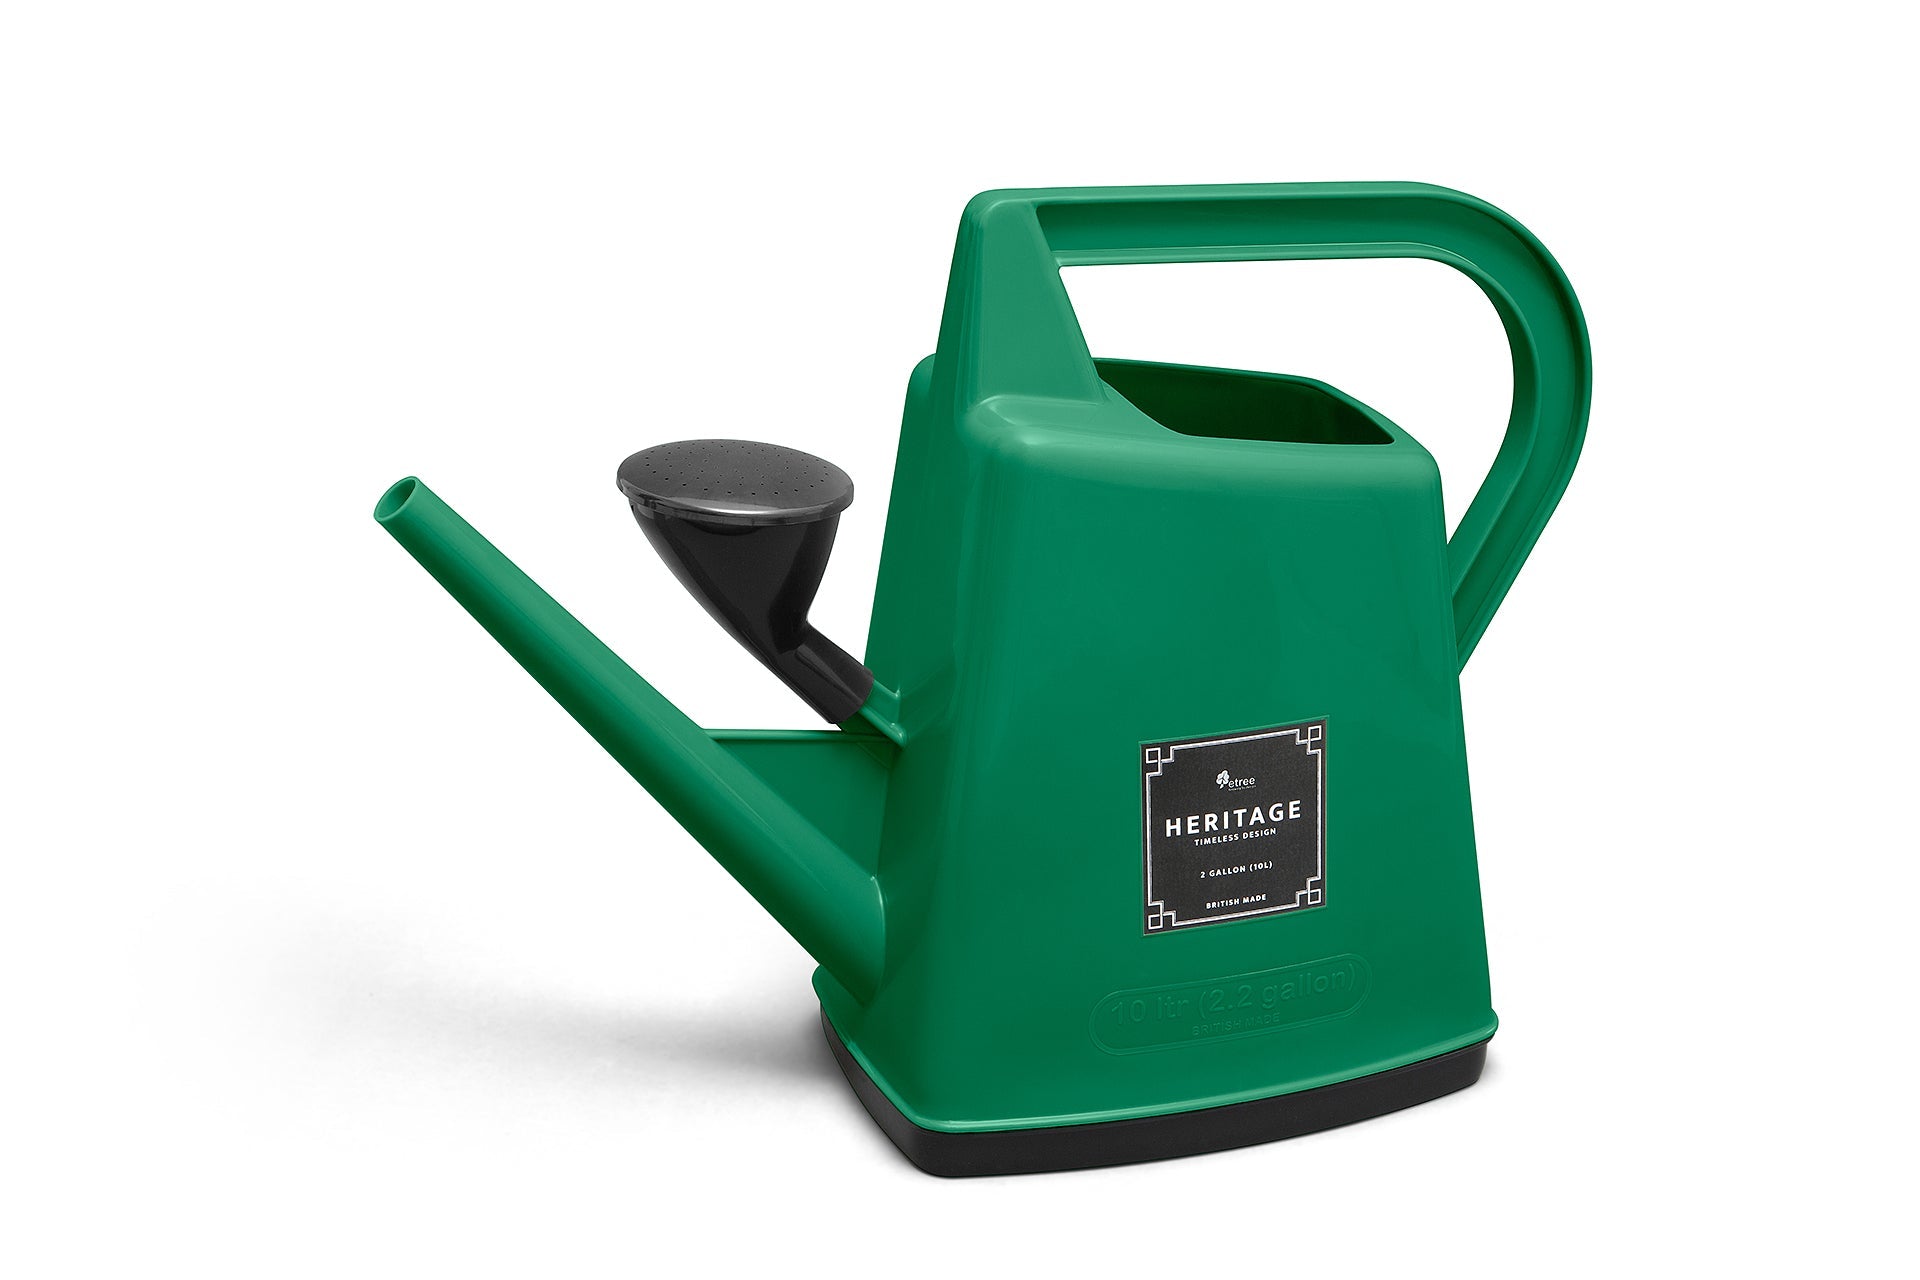 Etree British Heritage Watering Can with Detachable Rose - Available in 1 Gallon (5L) / 2 Gallon (10L) Sizes